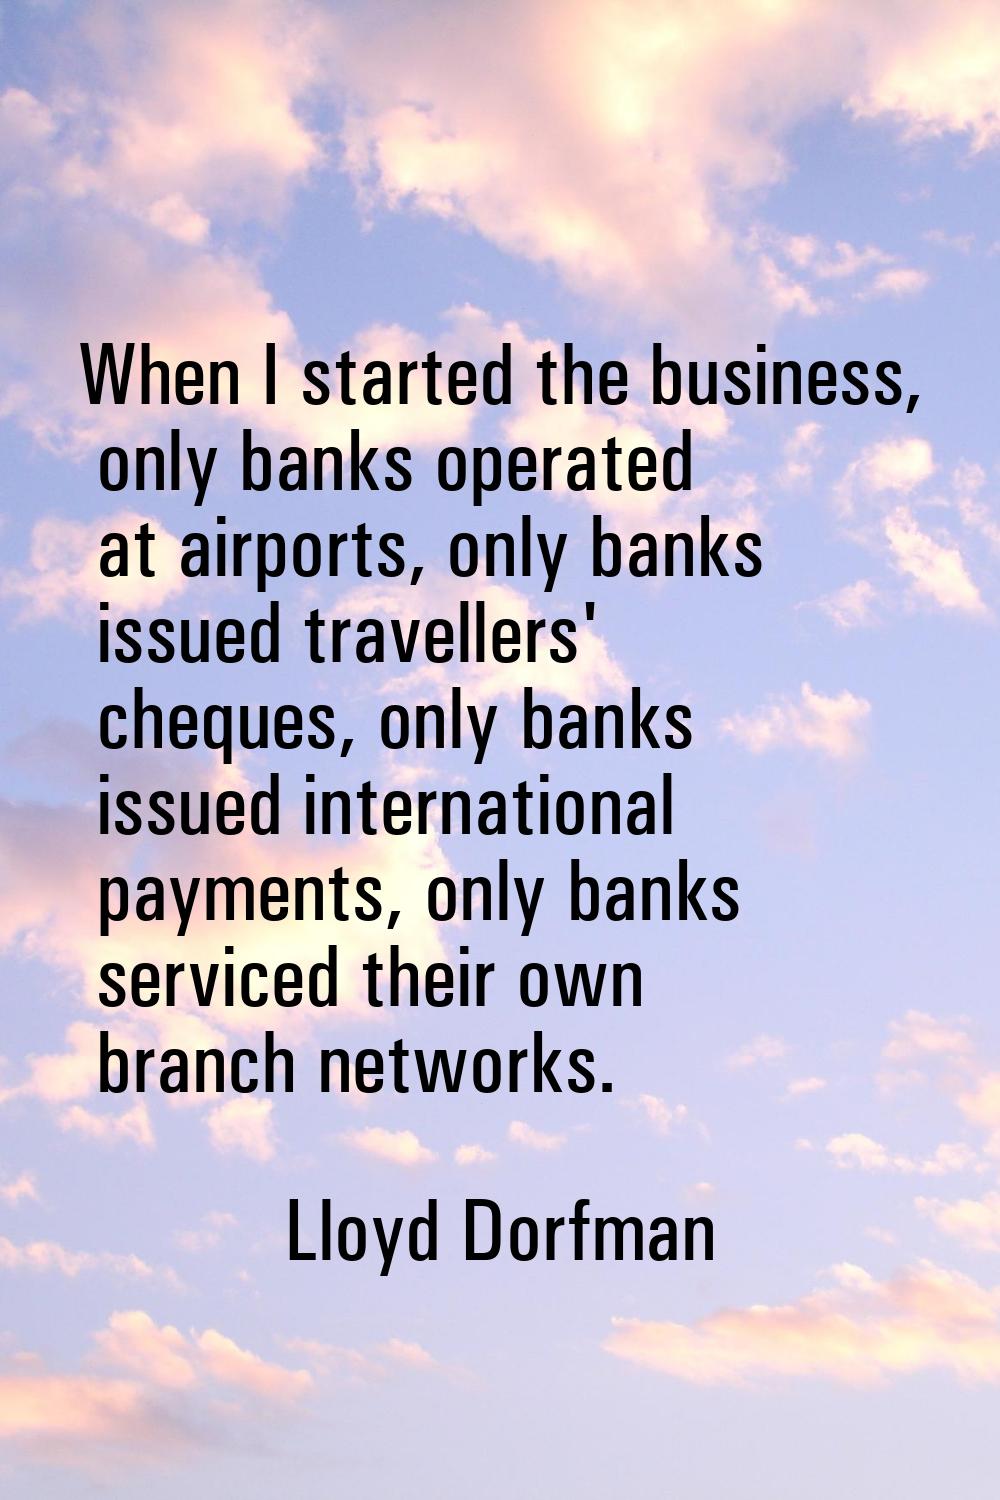 When I started the business, only banks operated at airports, only banks issued travellers' cheques